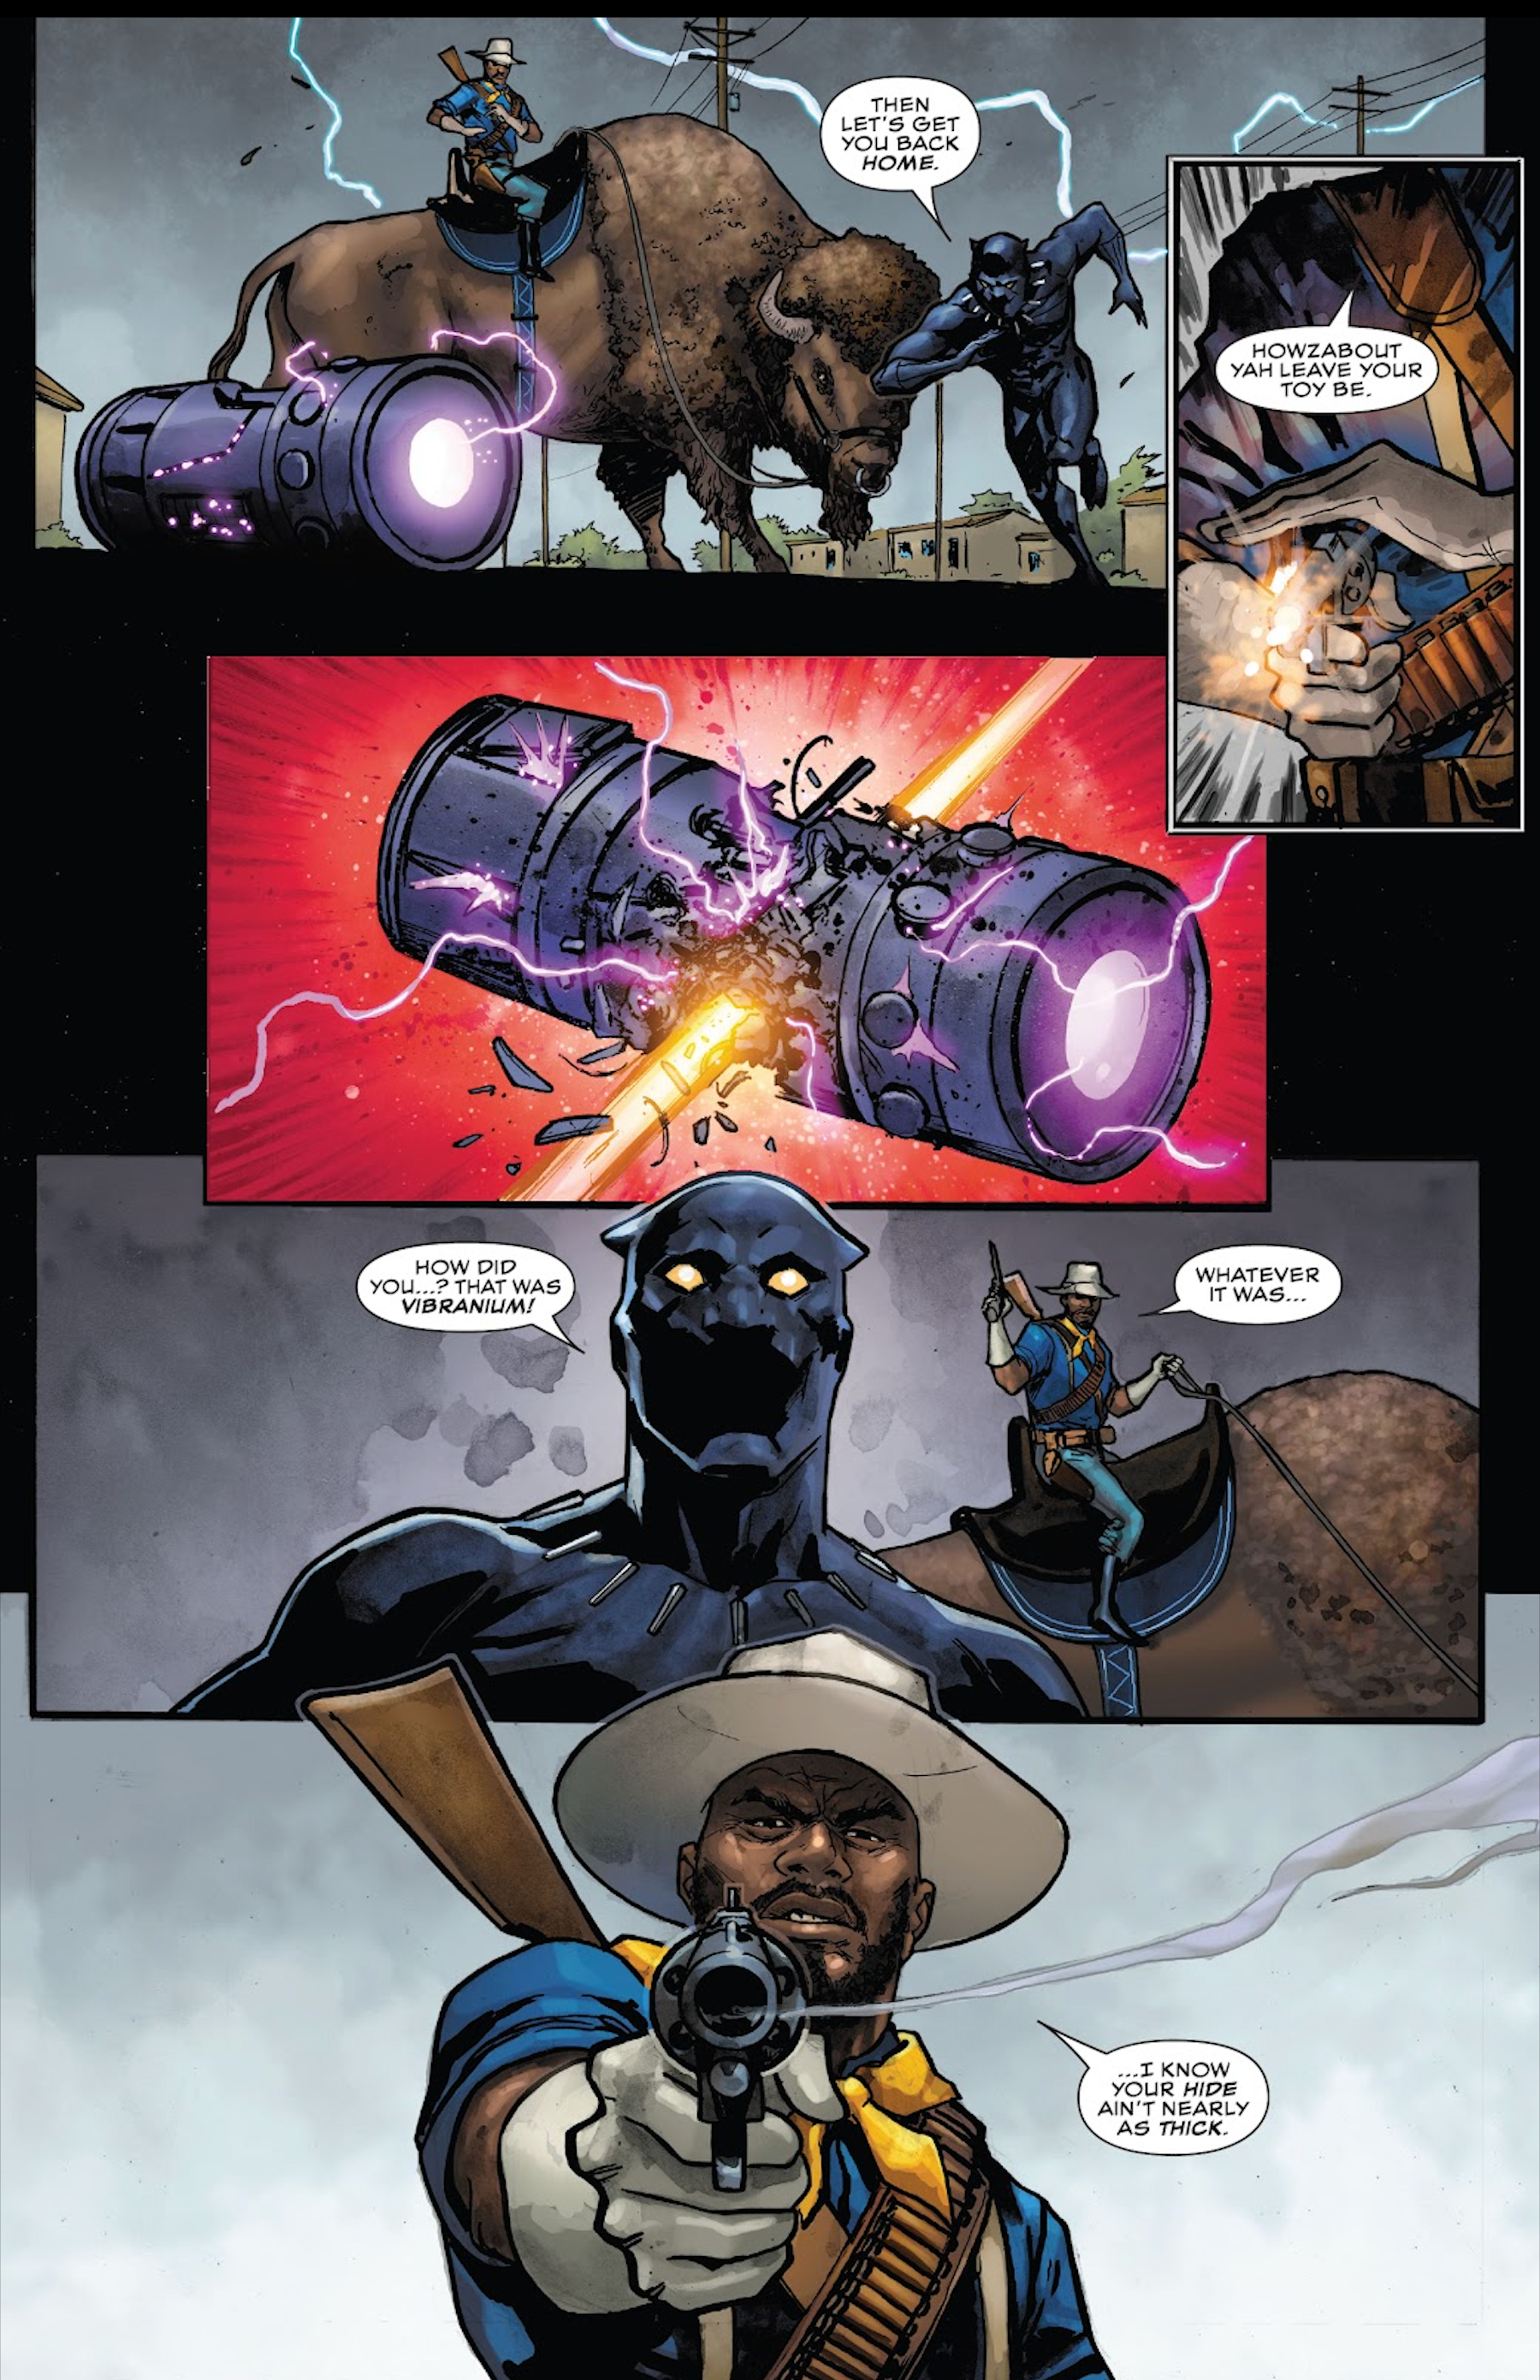 Buffalo Soldier attacks Black Panther and Vibranium